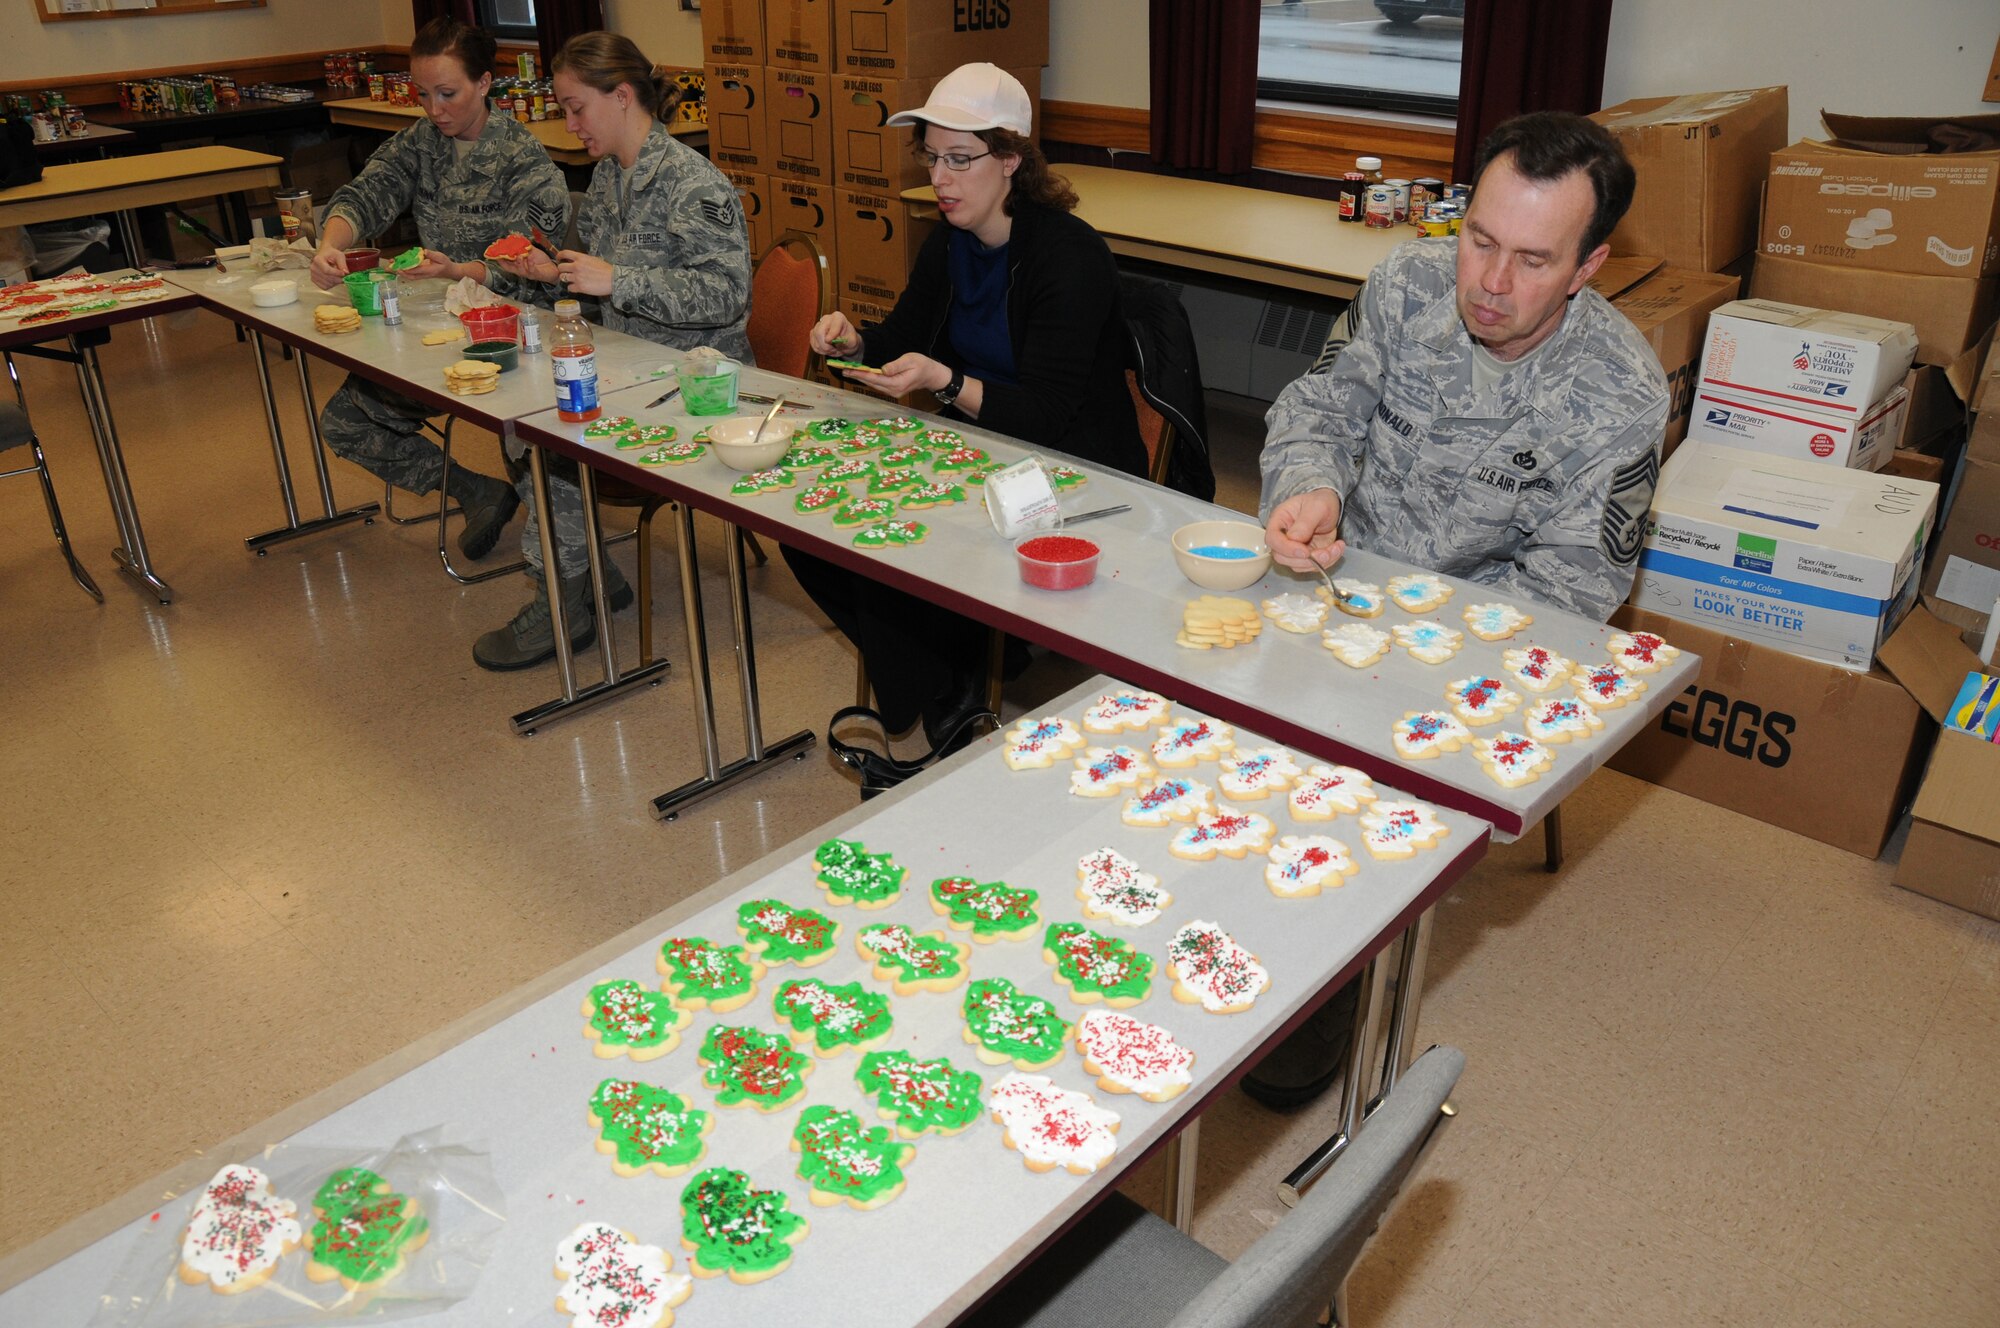 SSgt Kelly Dunn, SSgt Kara Schmidt, Karin Zimmerman and CMSgt Earl McDonald. All from the  107TH Airlift Wing, Decorate cookies during the wing's first OPERATION CHRISTMAS COOKIE. (Air Force Photo/SMSgt Ray Lloyd)